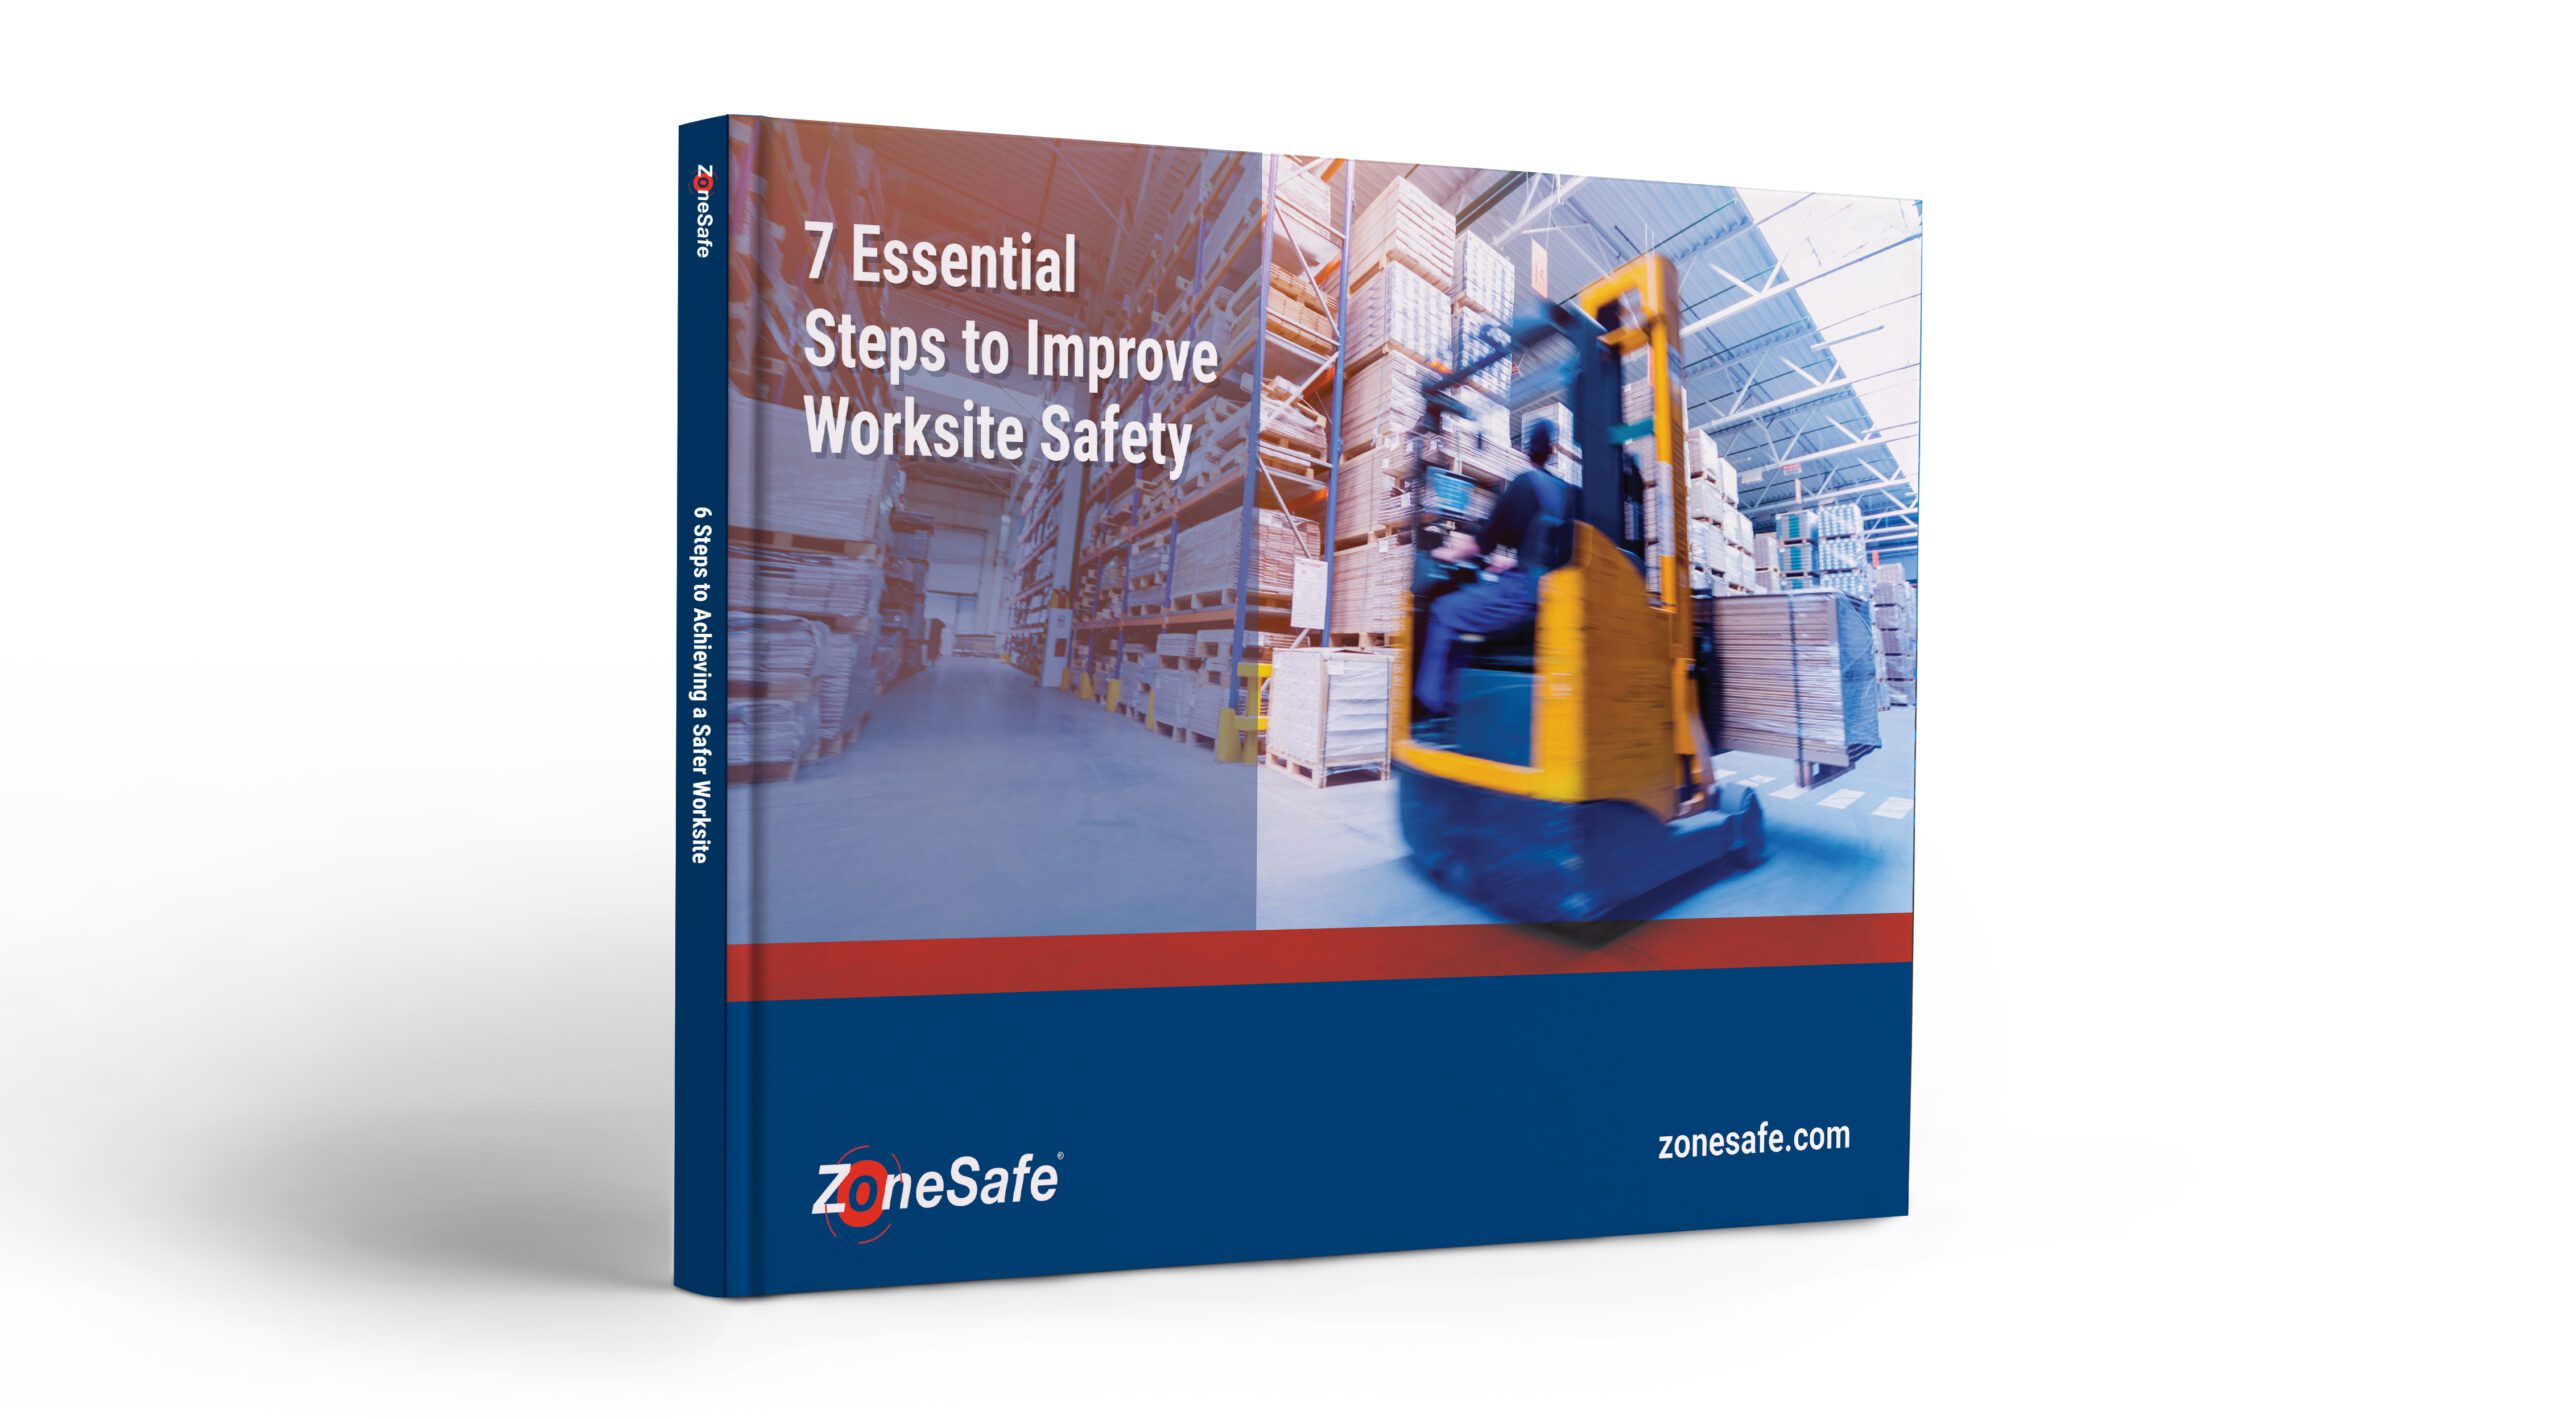 7-essential-steps-to-improving-worksite-safety-book-front-cover-image